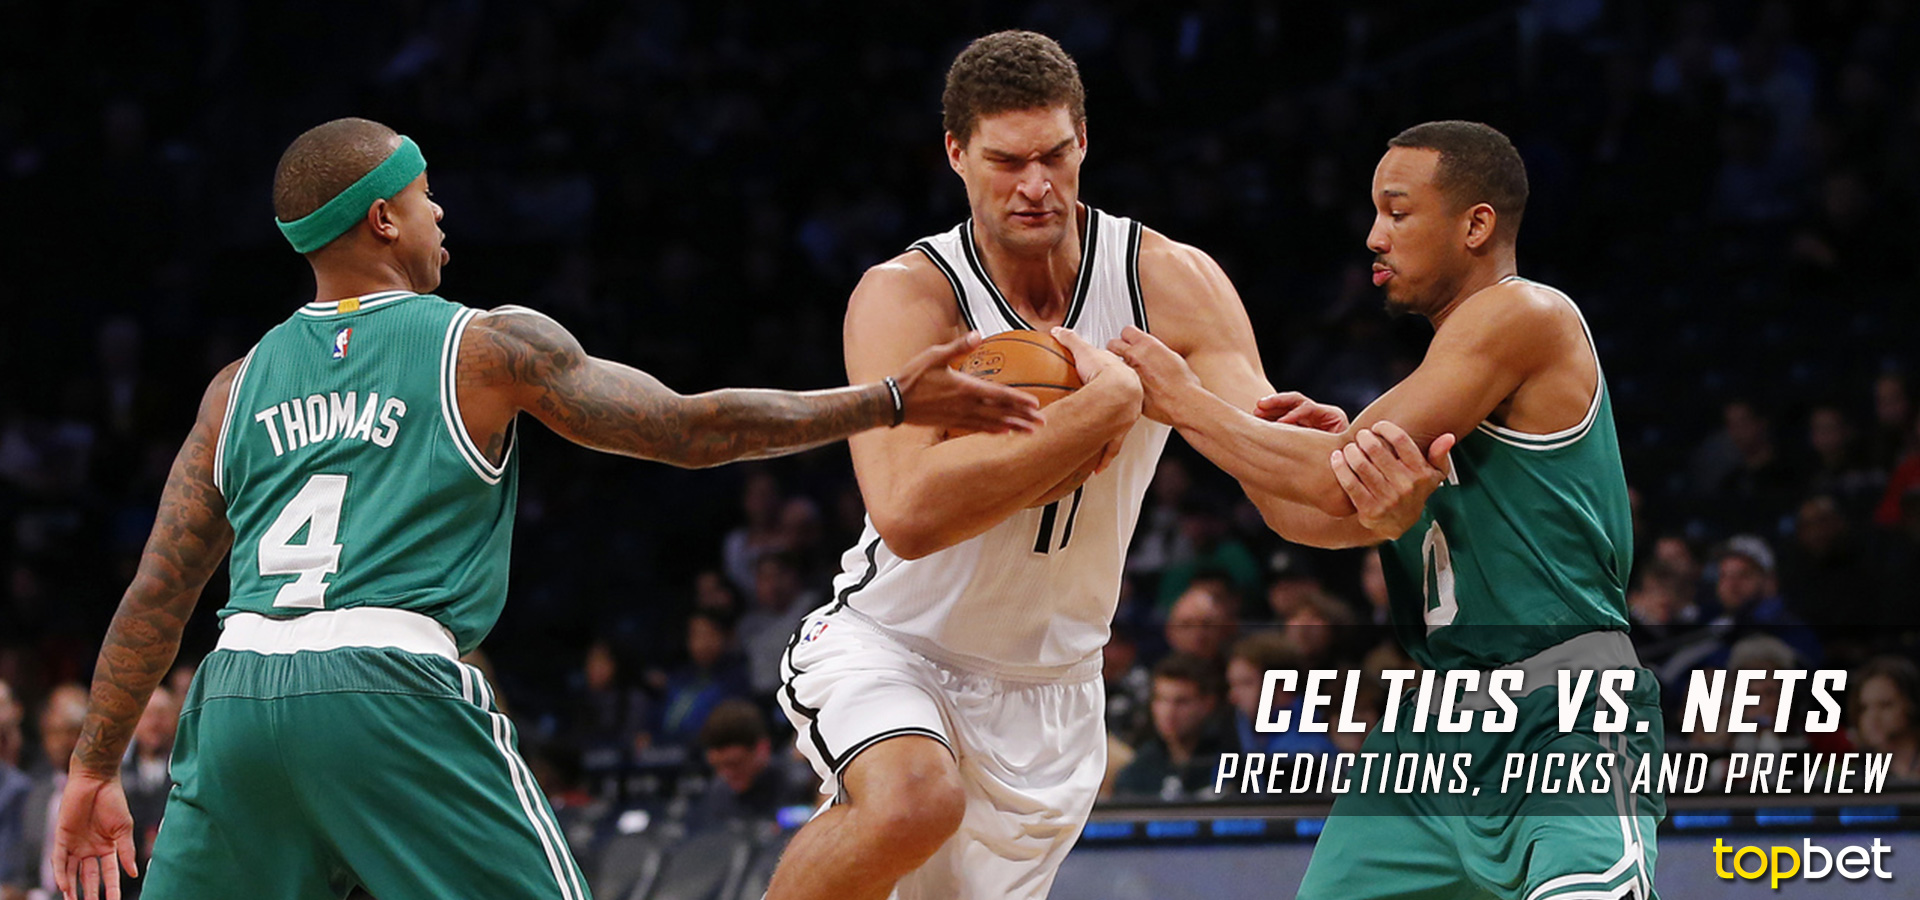 Celtics vs Nets Predictions, Picks and Preview – March 2017